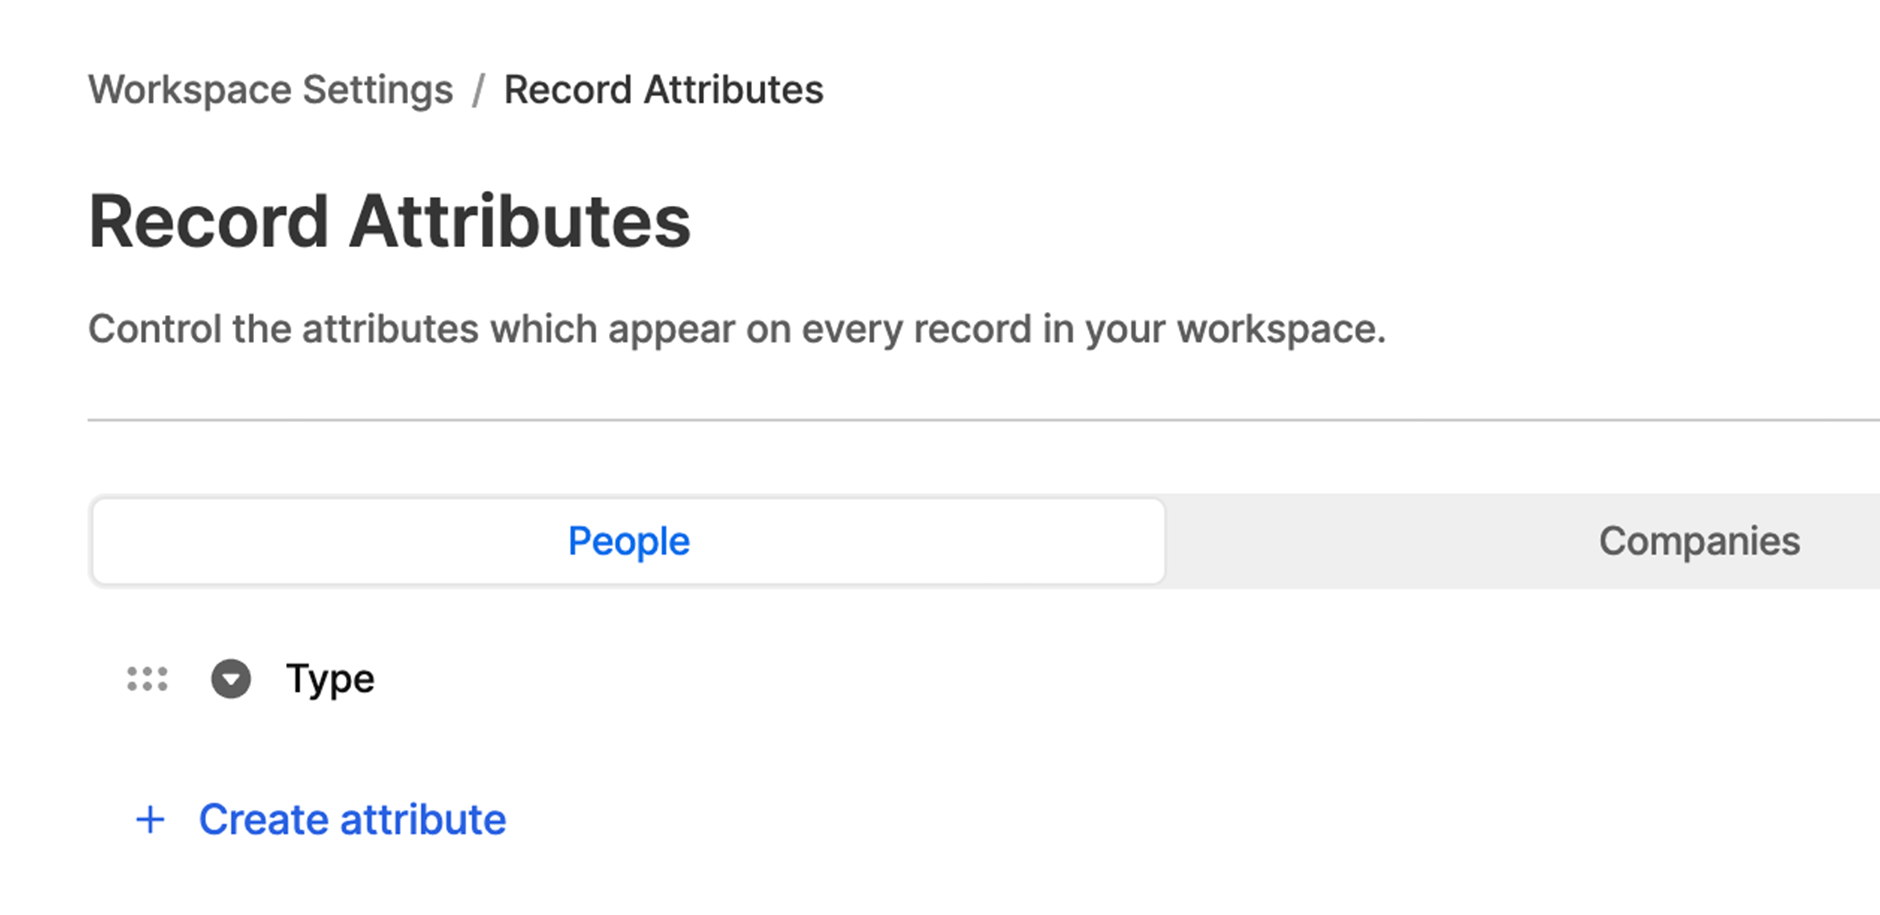 Close-up on the Record Attributes section of the Workspace Settings window in Attio. Admins can set which attributes will appear on every record in the workspace. 